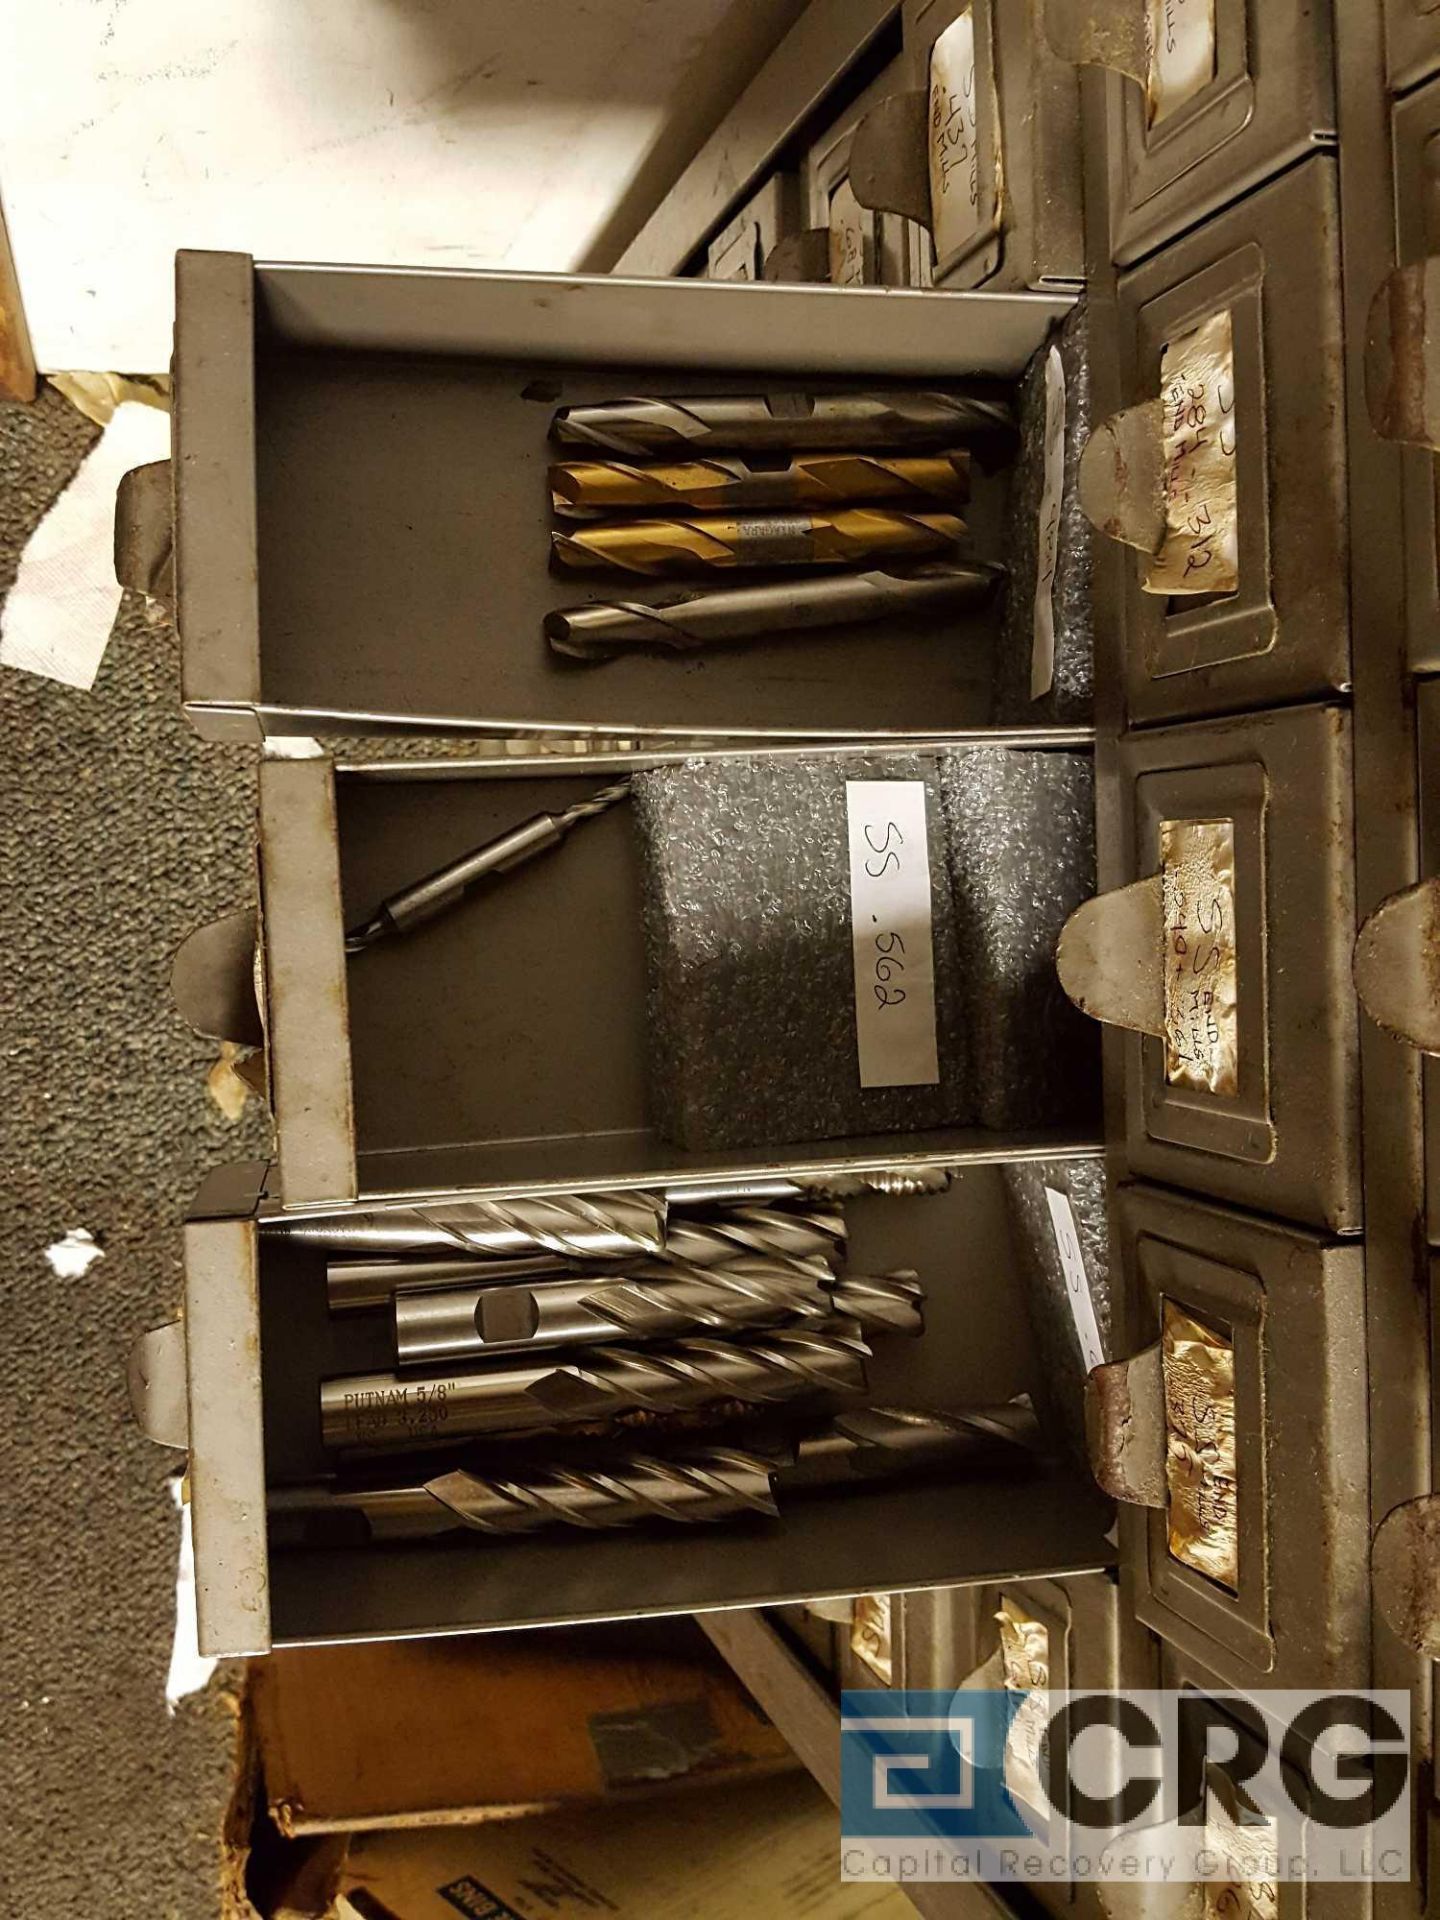 Lot includes (2) cabinets and contents of assorted end mills and cutting tools etc. - Image 7 of 28